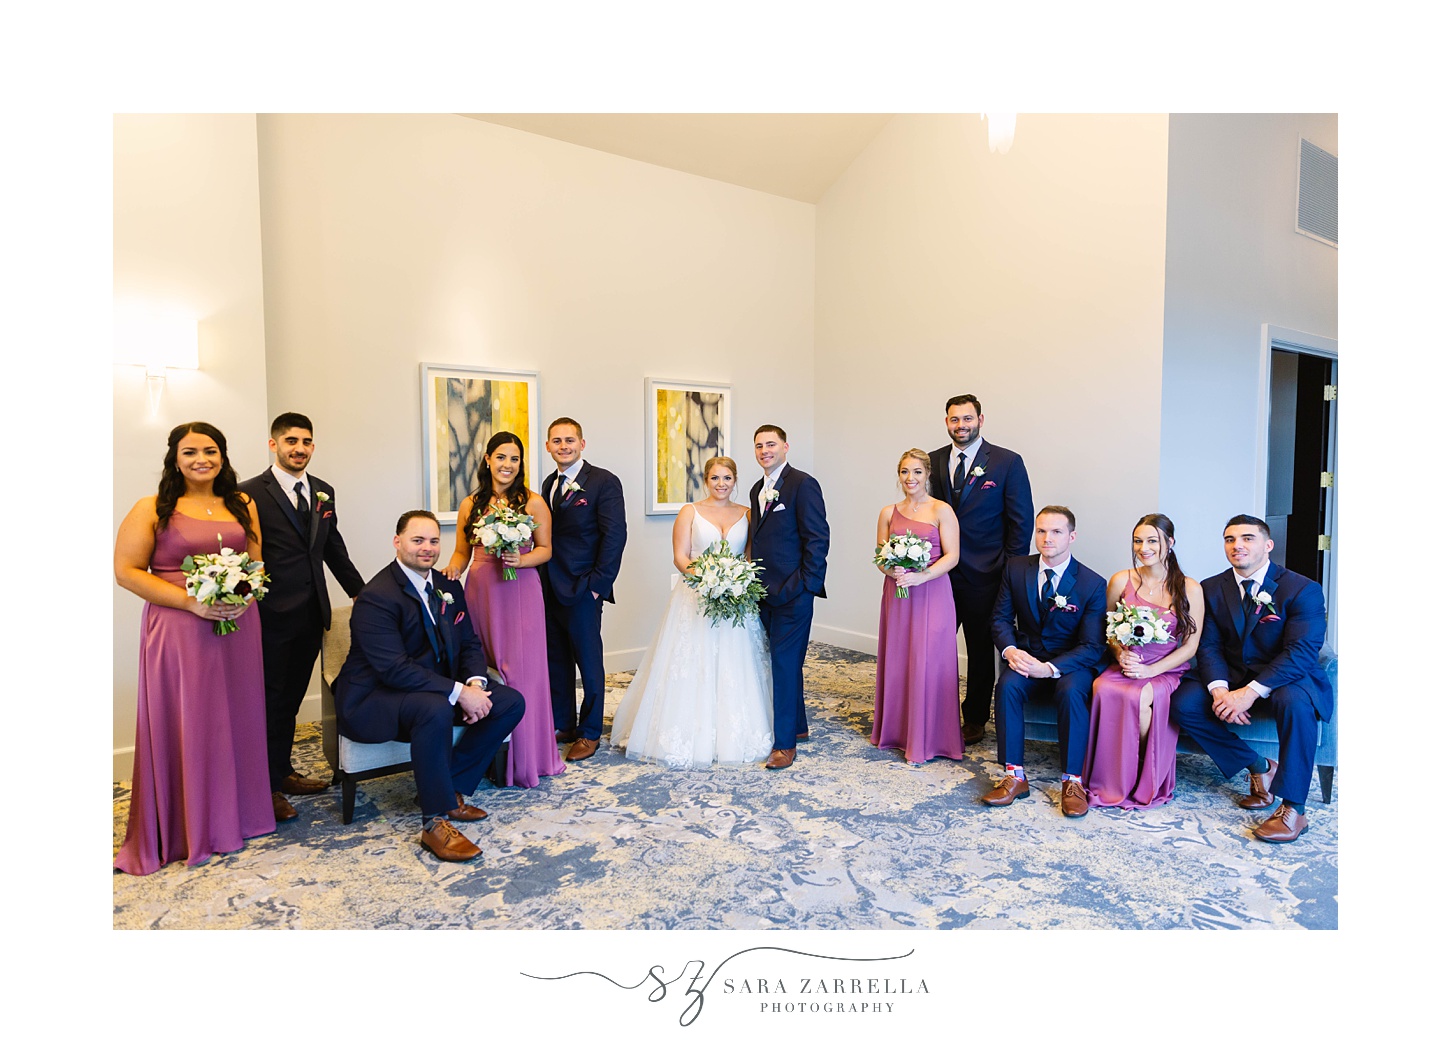 wedding party poses in lobby of Rhode Island venue